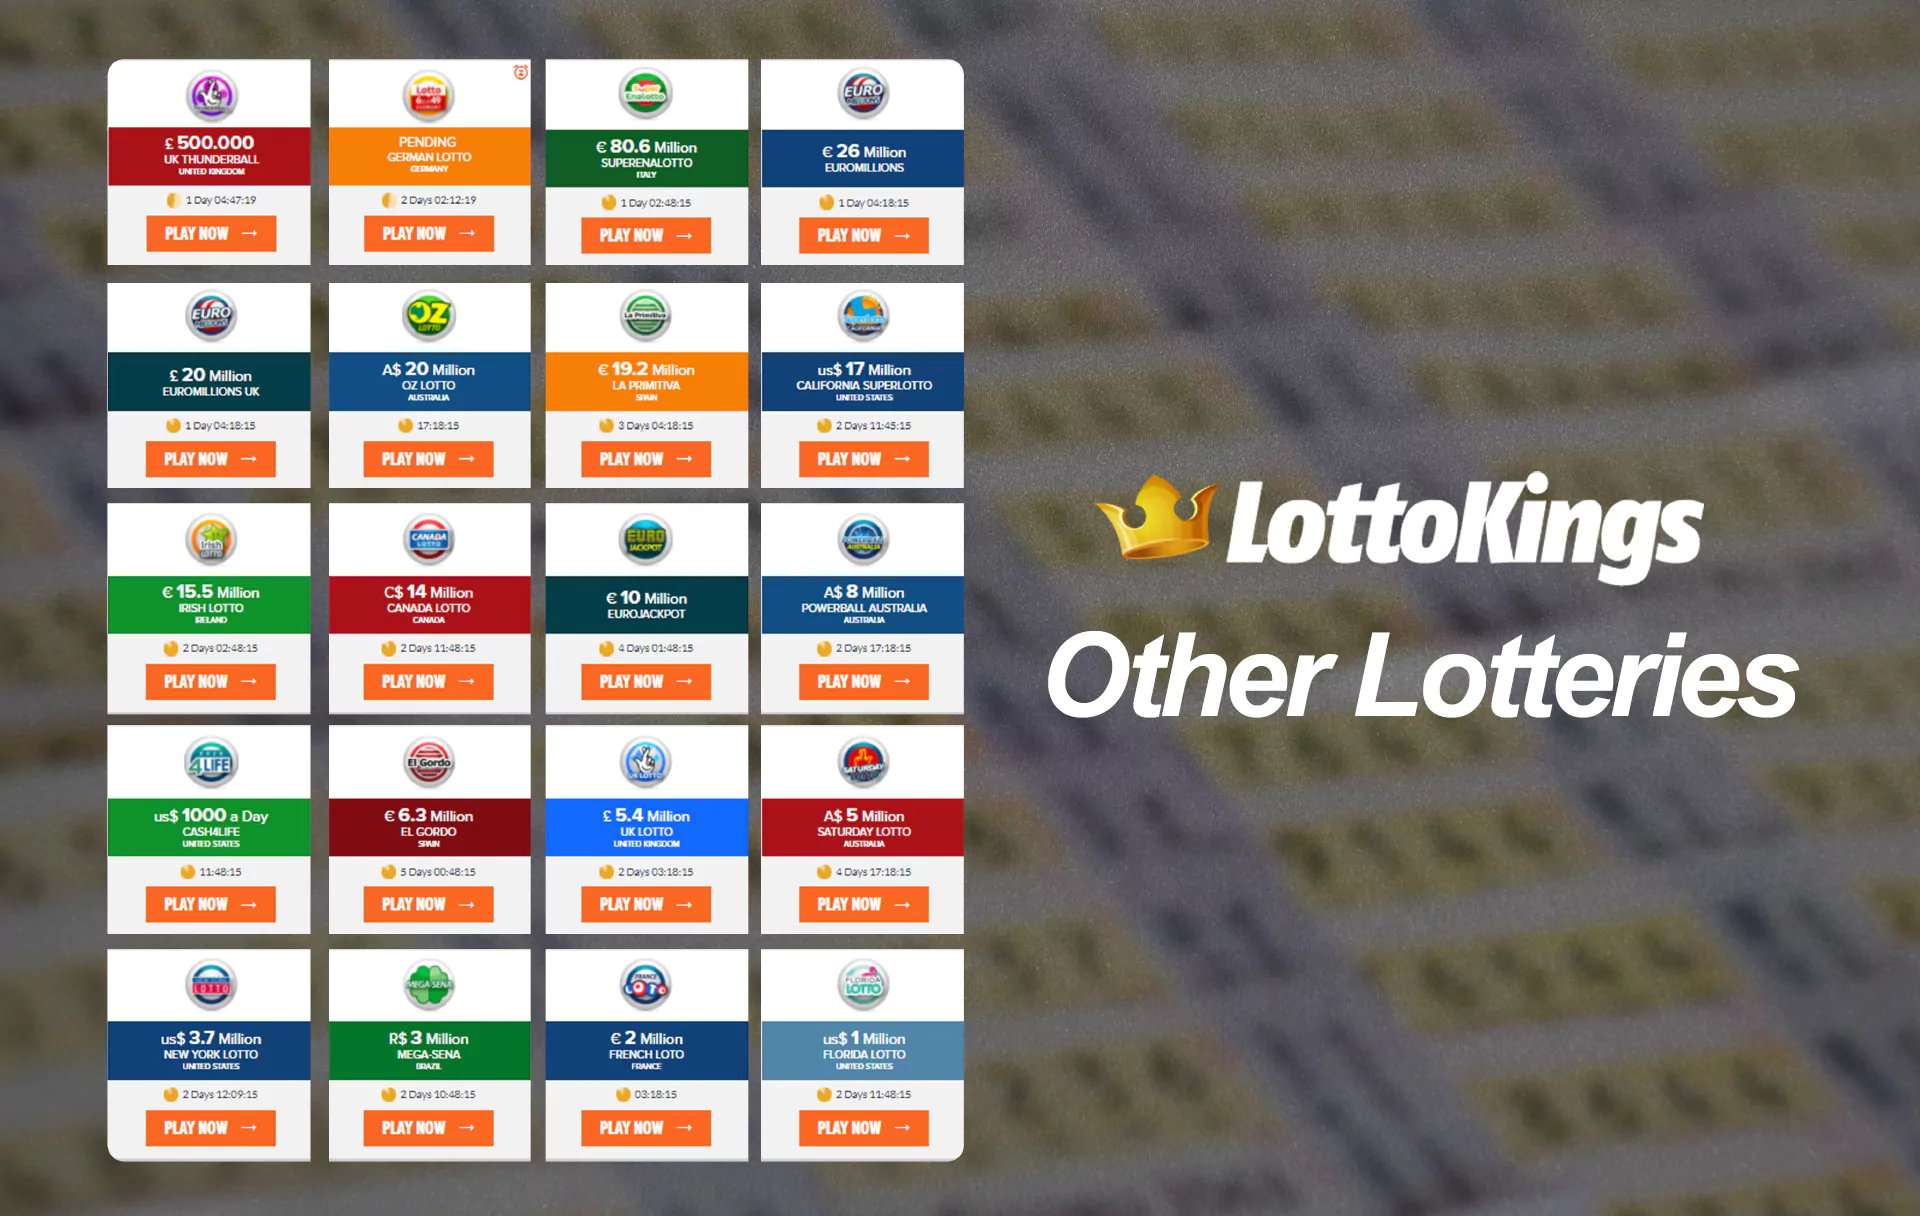 Also, you can find at least twenty other lotteries from different countries in the online shop.